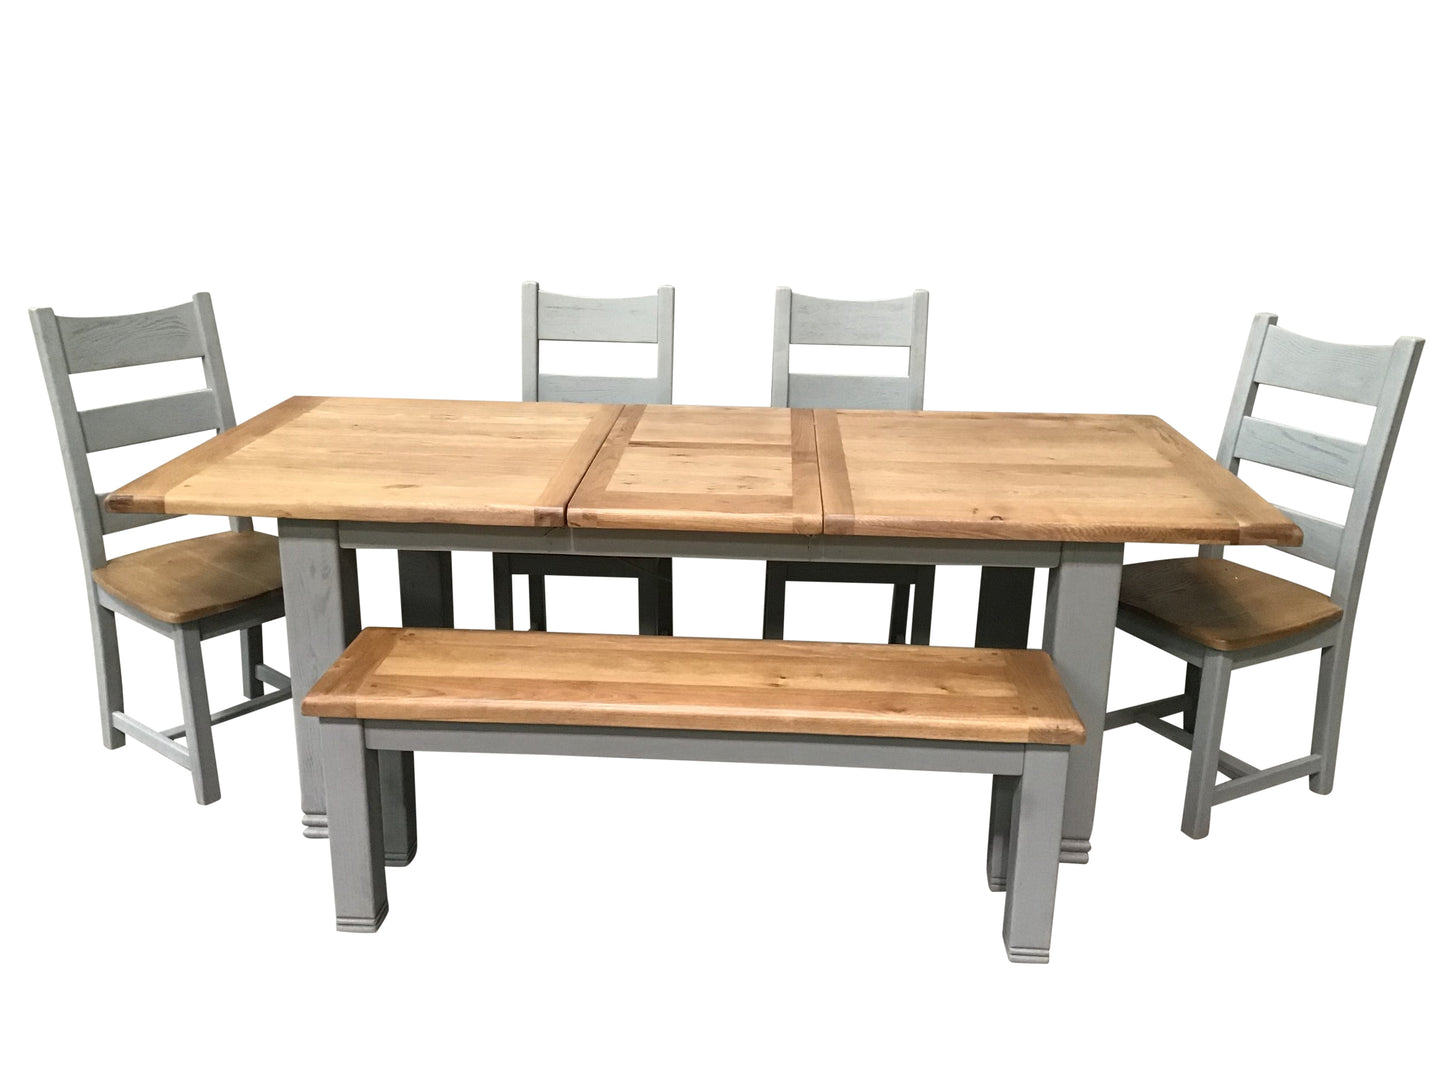 Danube Oak 1.8m Extension Dining Set painted French Grey